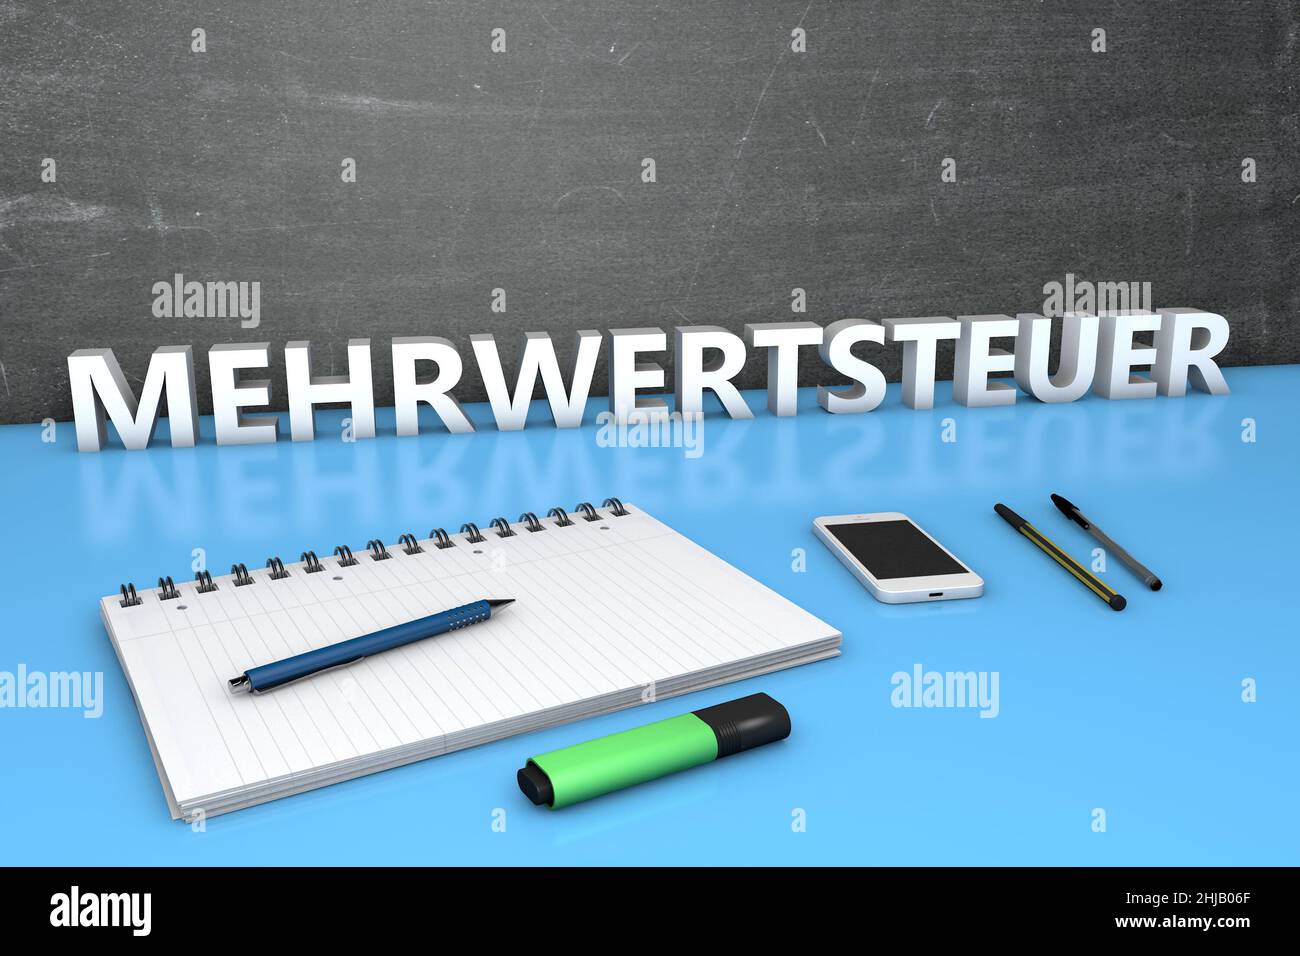 Mehrwertsteuer - german word for value added tax VAT - text concept with chalkboard, notebook, pens and mobile phone. 3D render illustration. Stock Photo